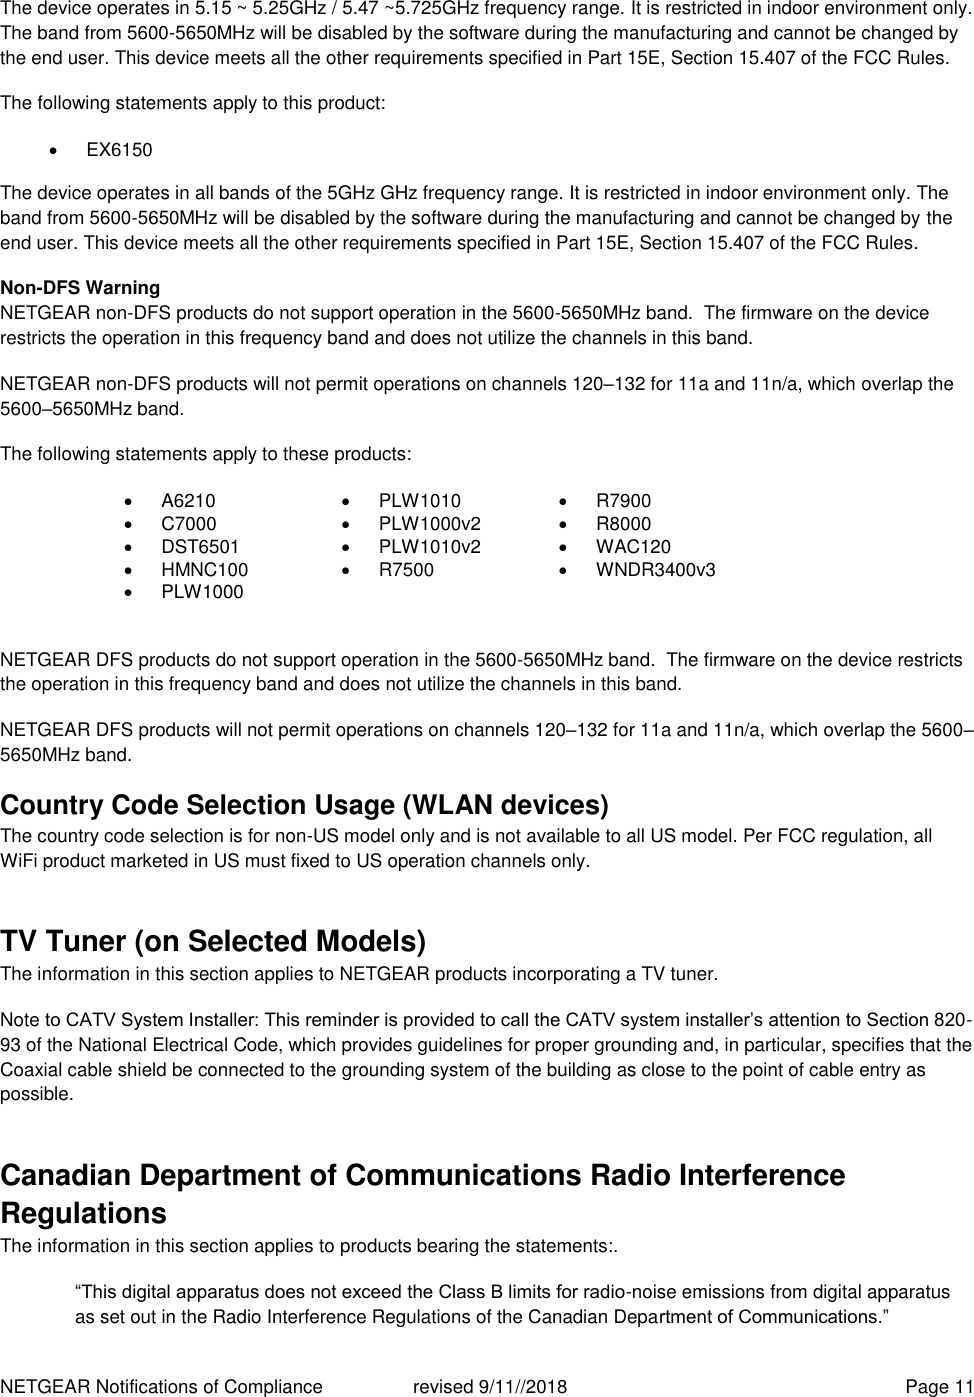 NETGEAR Notifications of Compliance    revised 9/11//2018  Page 11 The device operates in 5.15 ~ 5.25GHz / 5.47 ~5.725GHz frequency range. It is restricted in indoor environment only. The band from 5600-5650MHz will be disabled by the software during the manufacturing and cannot be changed by the end user. This device meets all the other requirements specified in Part 15E, Section 15.407 of the FCC Rules. The following statements apply to this product:   EX6150   The device operates in all bands of the 5GHz GHz frequency range. It is restricted in indoor environment only. The band from 5600-5650MHz will be disabled by the software during the manufacturing and cannot be changed by the end user. This device meets all the other requirements specified in Part 15E, Section 15.407 of the FCC Rules. Non-DFS Warning NETGEAR non-DFS products do not support operation in the 5600-5650MHz band.  The firmware on the device restricts the operation in this frequency band and does not utilize the channels in this band.  NETGEAR non-DFS products will not permit operations on channels 120–132 for 11a and 11n/a, which overlap the 5600–5650MHz band.  The following statements apply to these products:  A6210   PLW1010   R7900   C7000   PLW1000v2   R8000   DST6501   PLW1010v2   WAC120   HMNC100   R7500   WNDR3400v3   PLW1000    NETGEAR DFS products do not support operation in the 5600-5650MHz band.  The firmware on the device restricts the operation in this frequency band and does not utilize the channels in this band.  NETGEAR DFS products will not permit operations on channels 120–132 for 11a and 11n/a, which overlap the 5600–5650MHz band.  Country Code Selection Usage (WLAN devices) The country code selection is for non-US model only and is not available to all US model. Per FCC regulation, all WiFi product marketed in US must fixed to US operation channels only. TV Tuner (on Selected Models) The information in this section applies to NETGEAR products incorporating a TV tuner.  Note to CATV System Installer: This reminder is provided to call the CATV system installer’s attention to Section 820-93 of the National Electrical Code, which provides guidelines for proper grounding and, in particular, specifies that the Coaxial cable shield be connected to the grounding system of the building as close to the point of cable entry as possible. Canadian Department of Communications Radio Interference Regulations The information in this section applies to products bearing the statements:. “This digital apparatus does not exceed the Class B limits for radio-noise emissions from digital apparatus as set out in the Radio Interference Regulations of the Canadian Department of Communications.” 